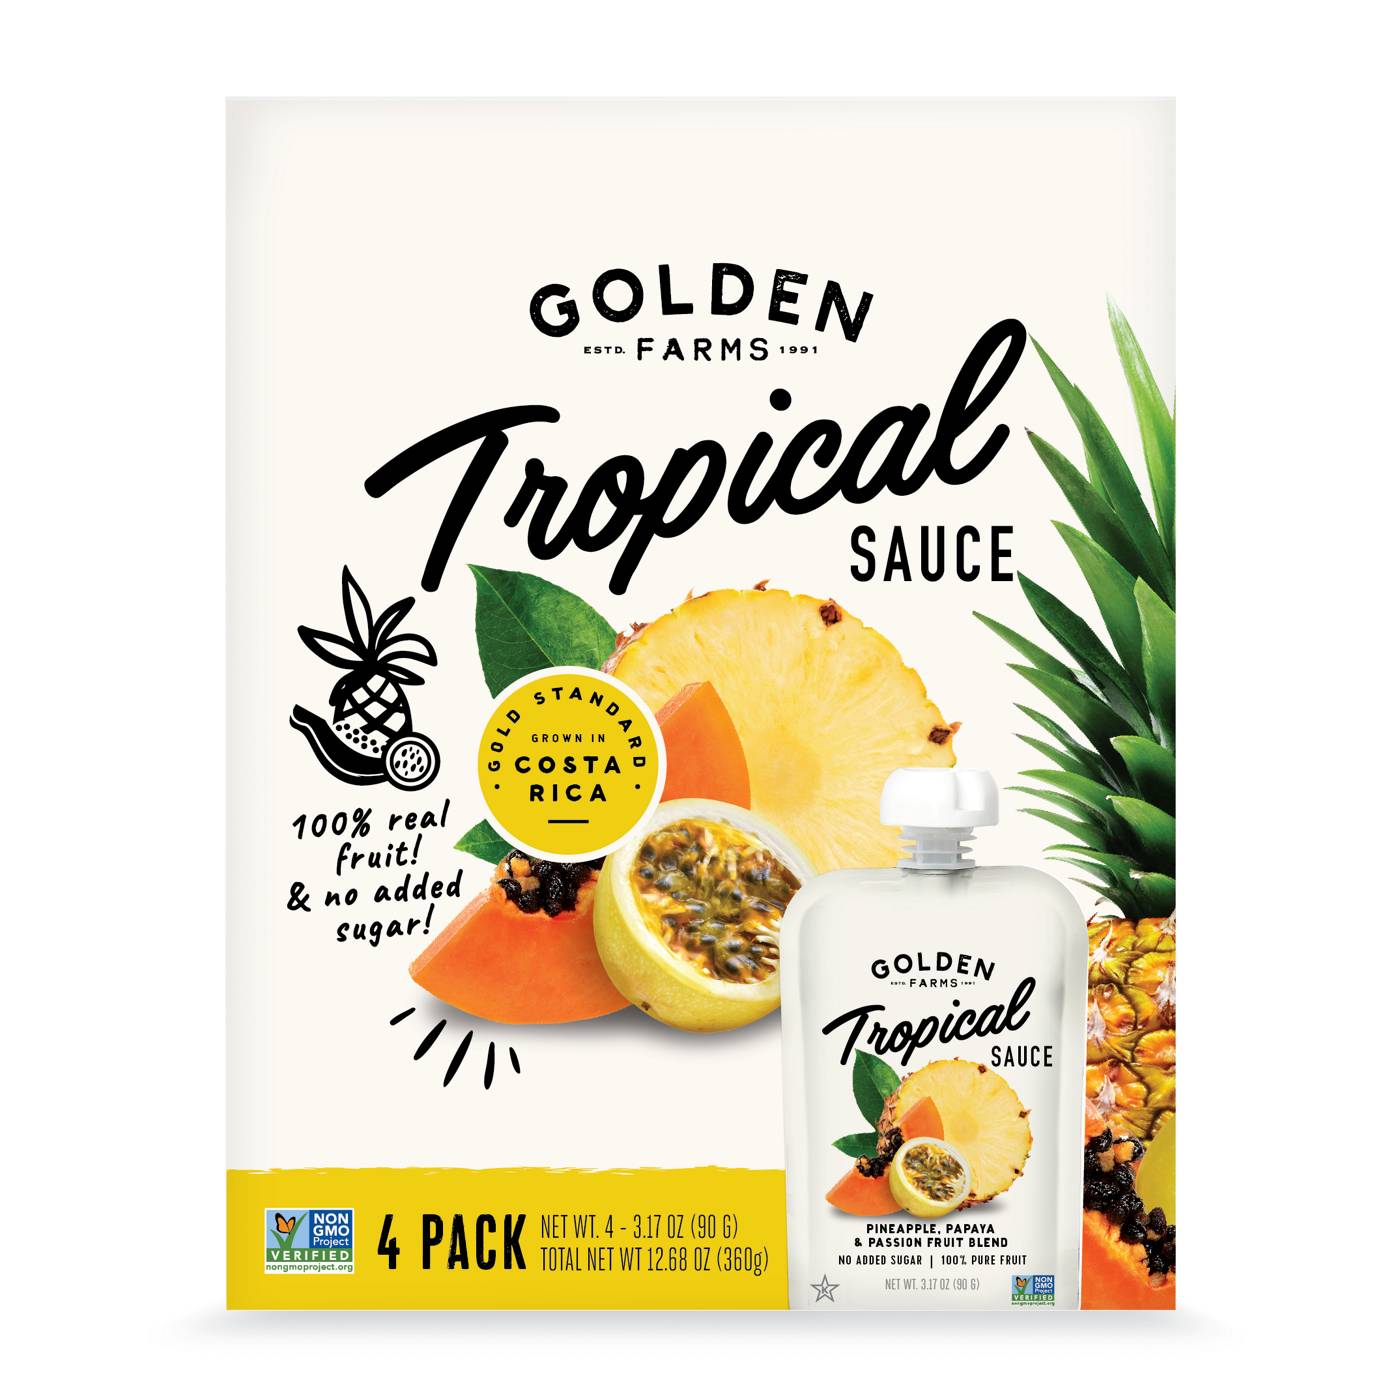 Golden Farms Tropical Sauce Pouches; image 1 of 3